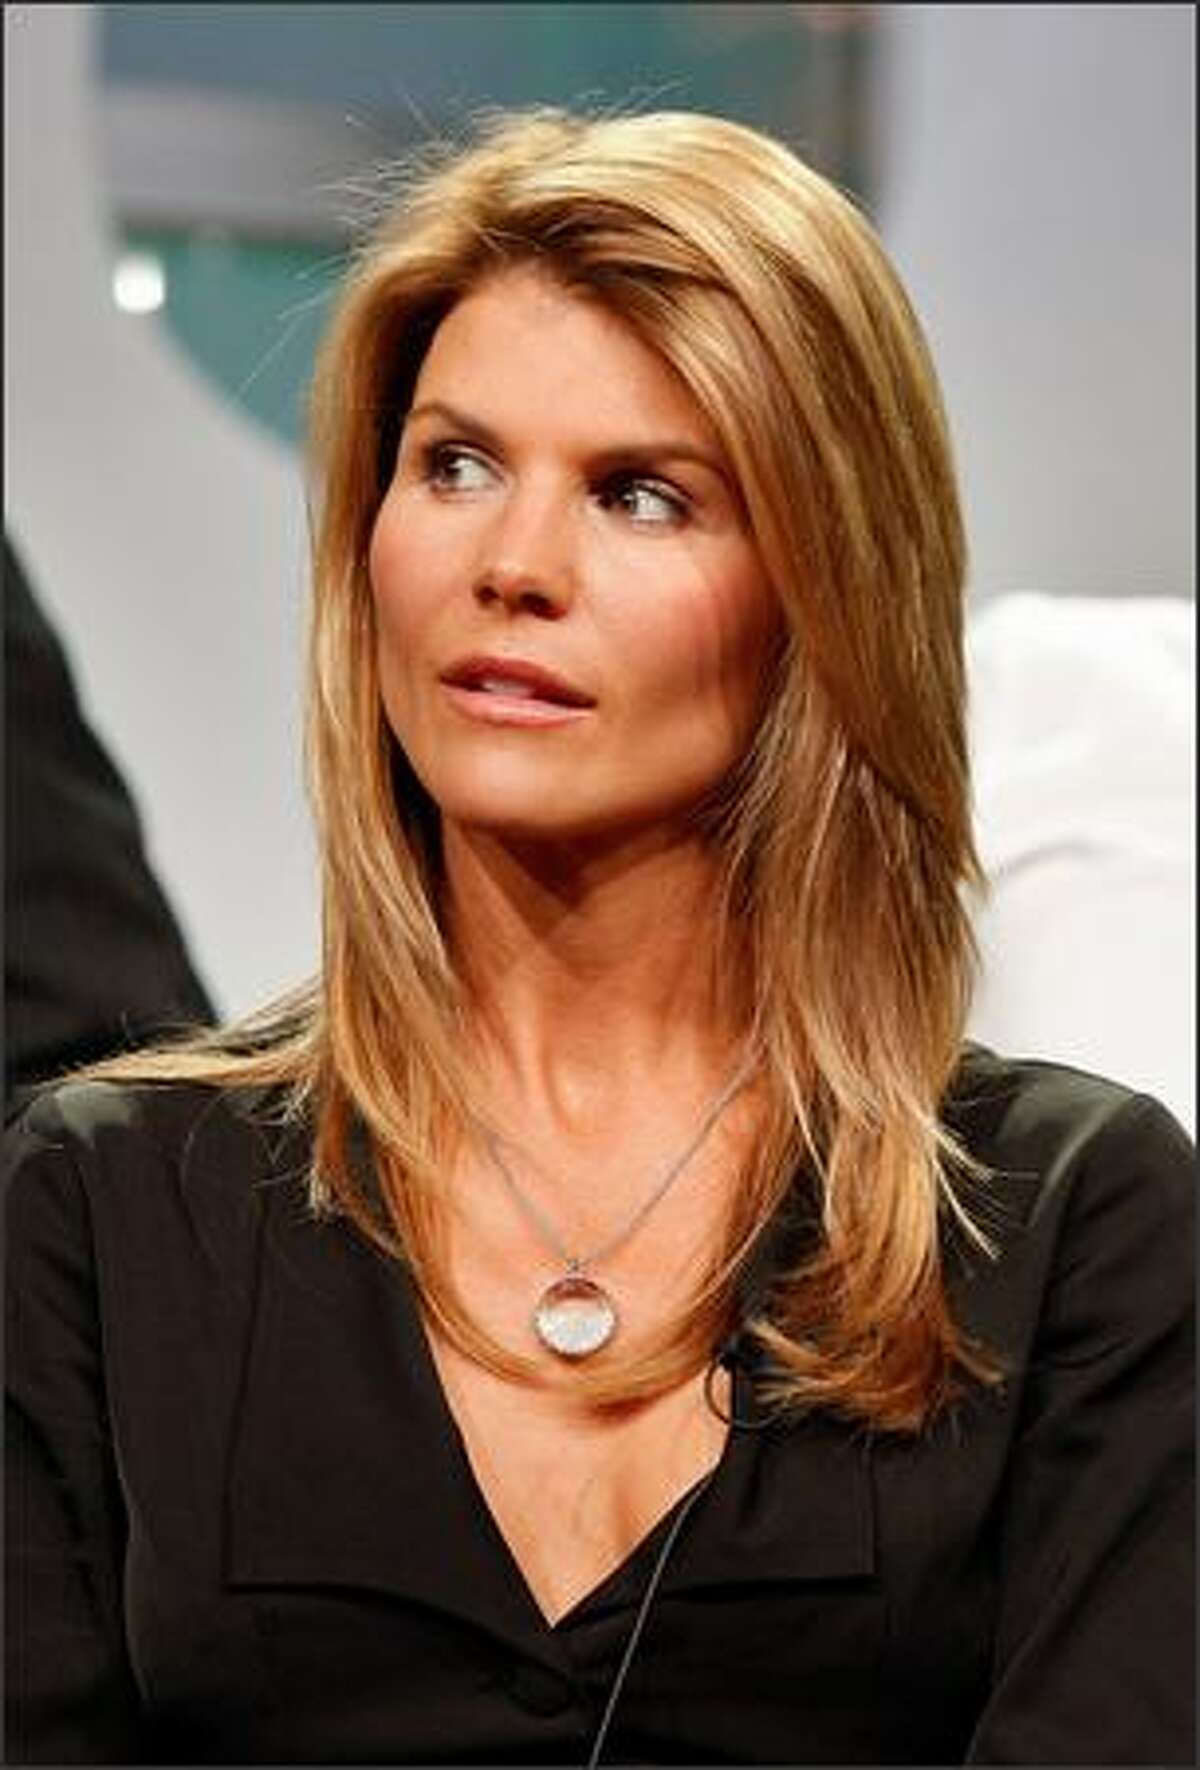 Actress Lori Loughlin of "90210" speaks during the CW portion of the Television Critics Association Press Tour held at the Beverly Hilton Hotel in Beverly Hills, Calif., on Saturday.